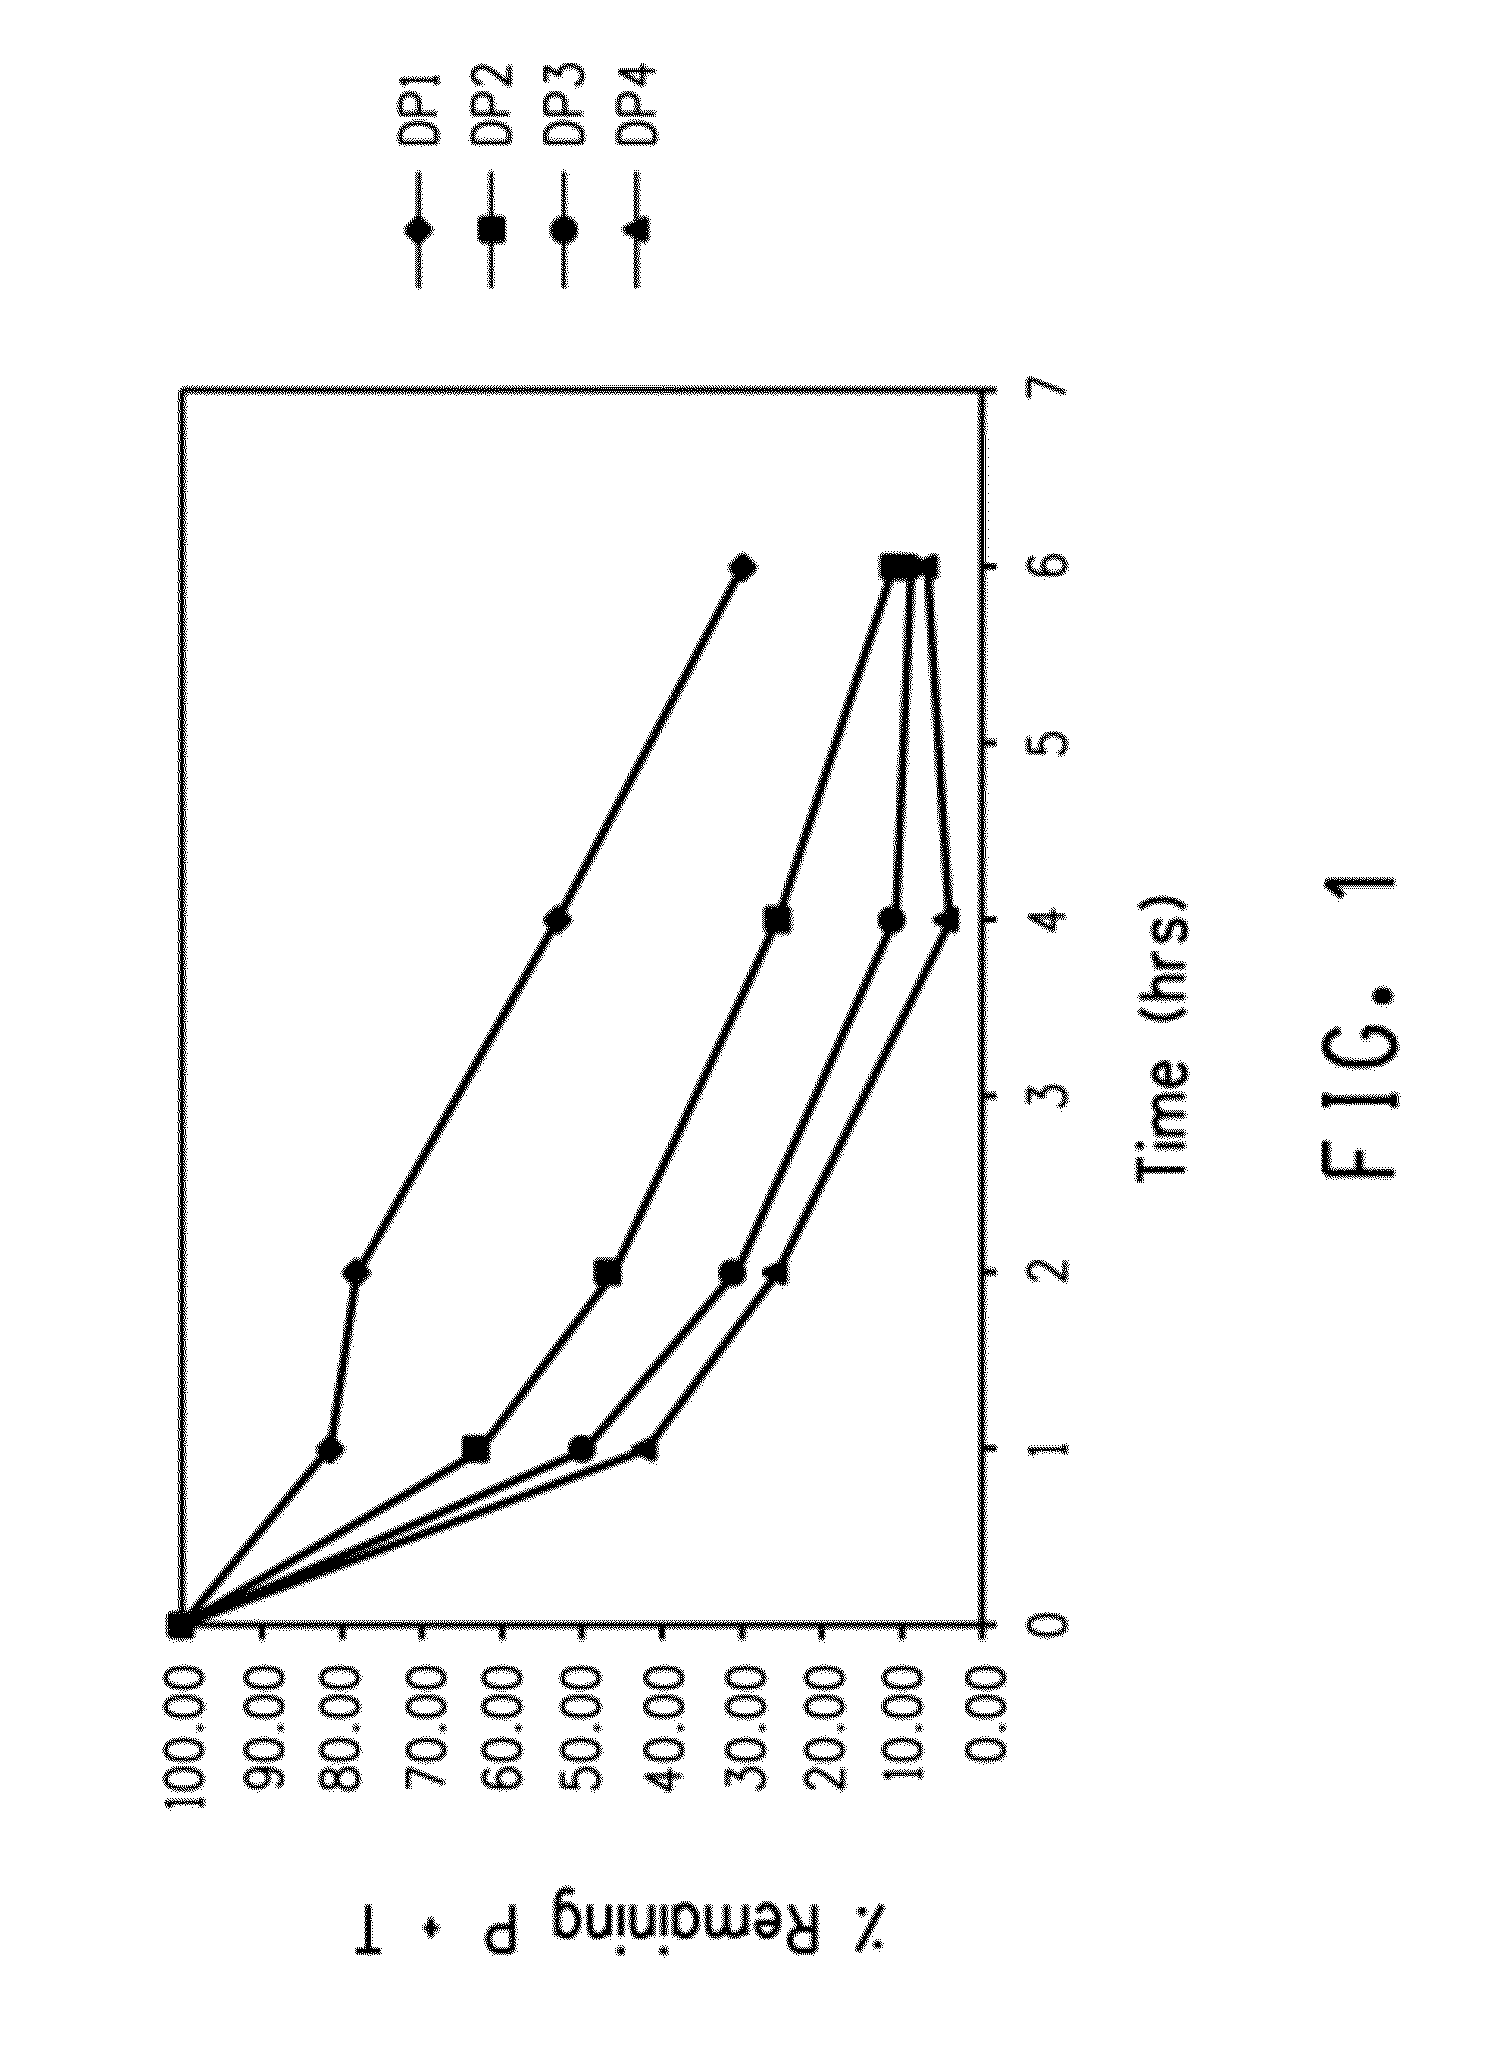 Acid-clevable linkers exhibiting altered rates of acid hydrolysis